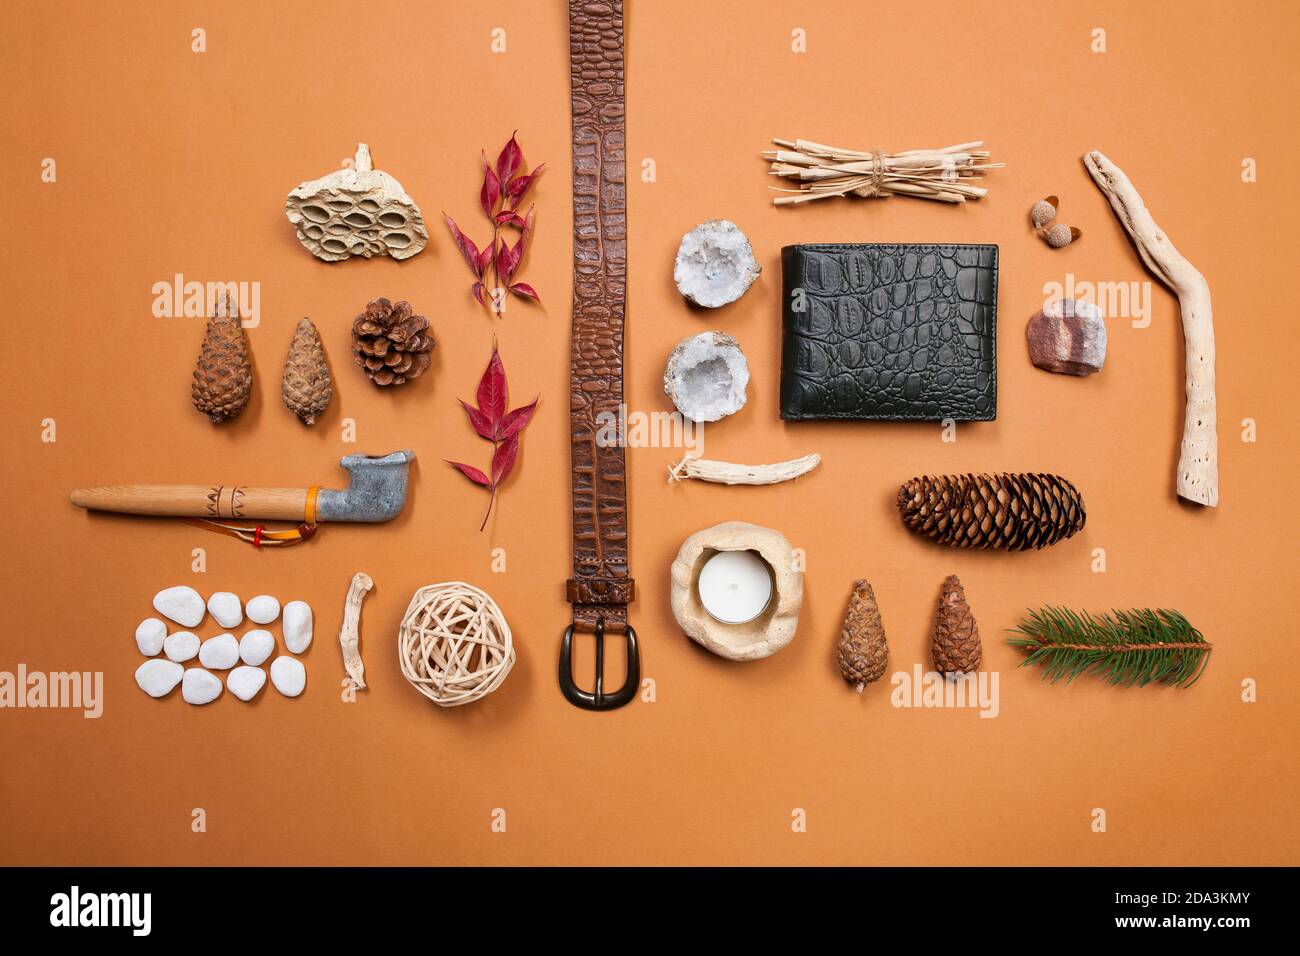 Still life composition of belt, wallet, peace pipe and natural things like pine cones, white stones, red leafs and minerals on a brown background Stock Photo